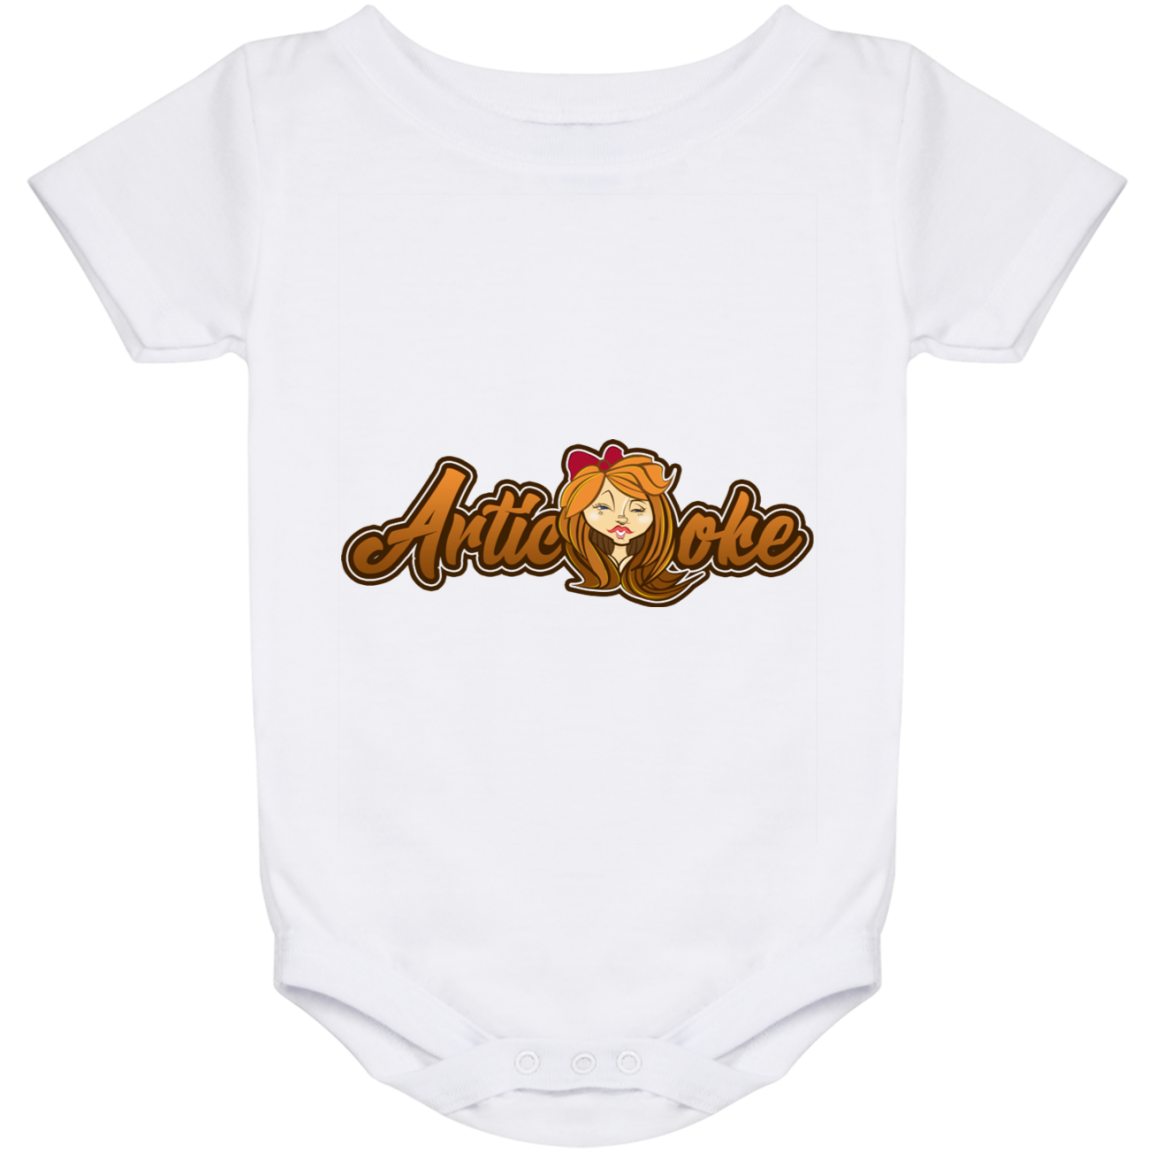 ZZ#21 Characters and Fonts. Aubrey. A show case of my characters and font styles. Baby Onesie 24 Month